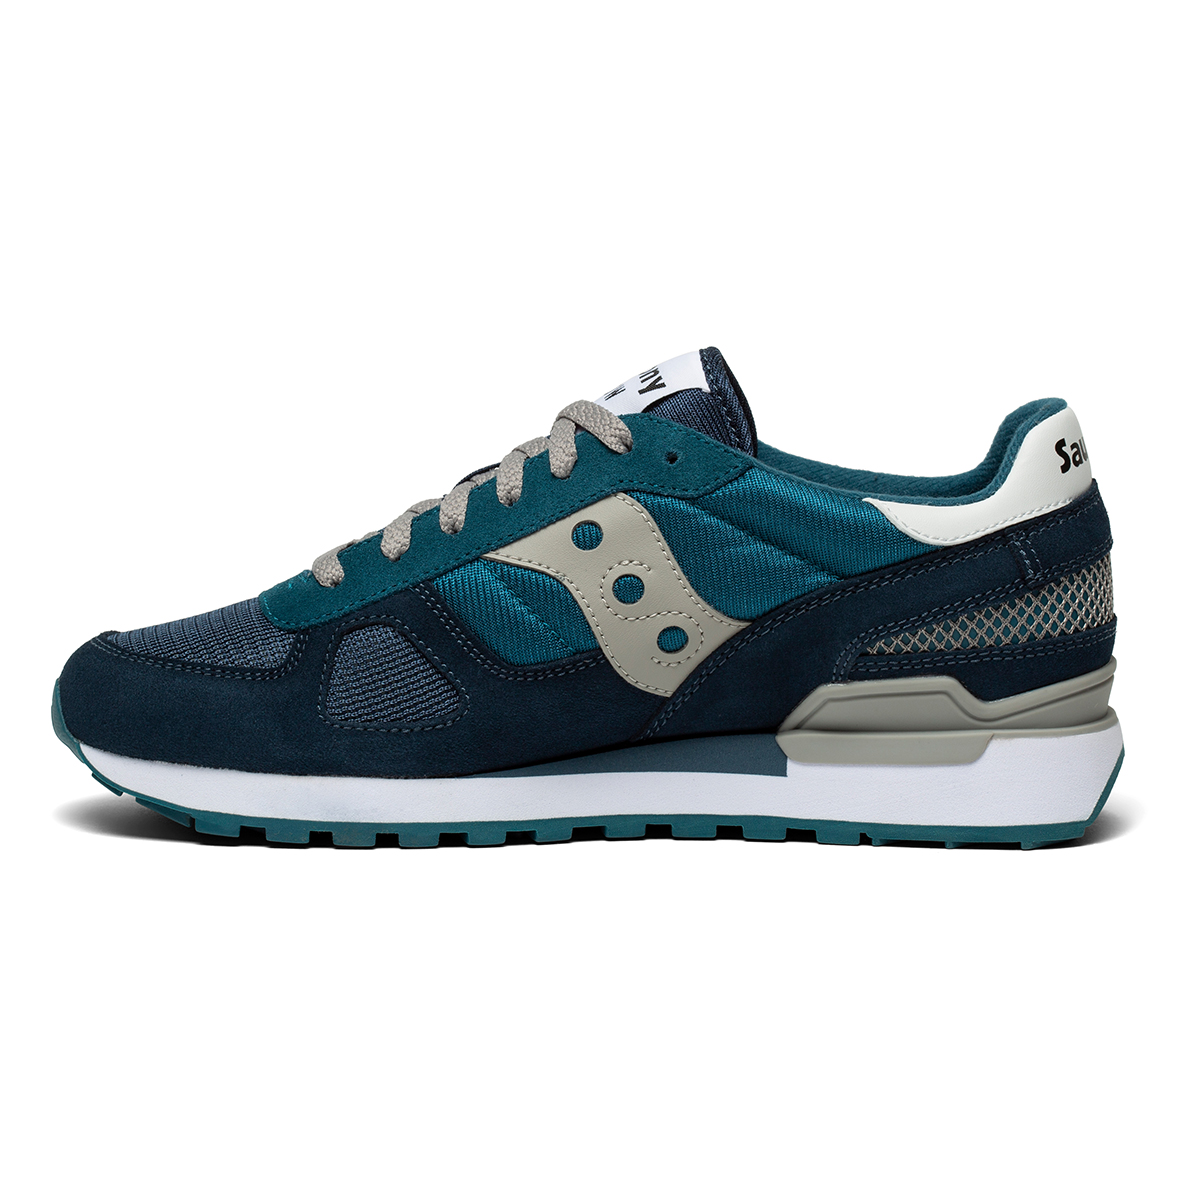 Saucony Shadow Original, , large image number null